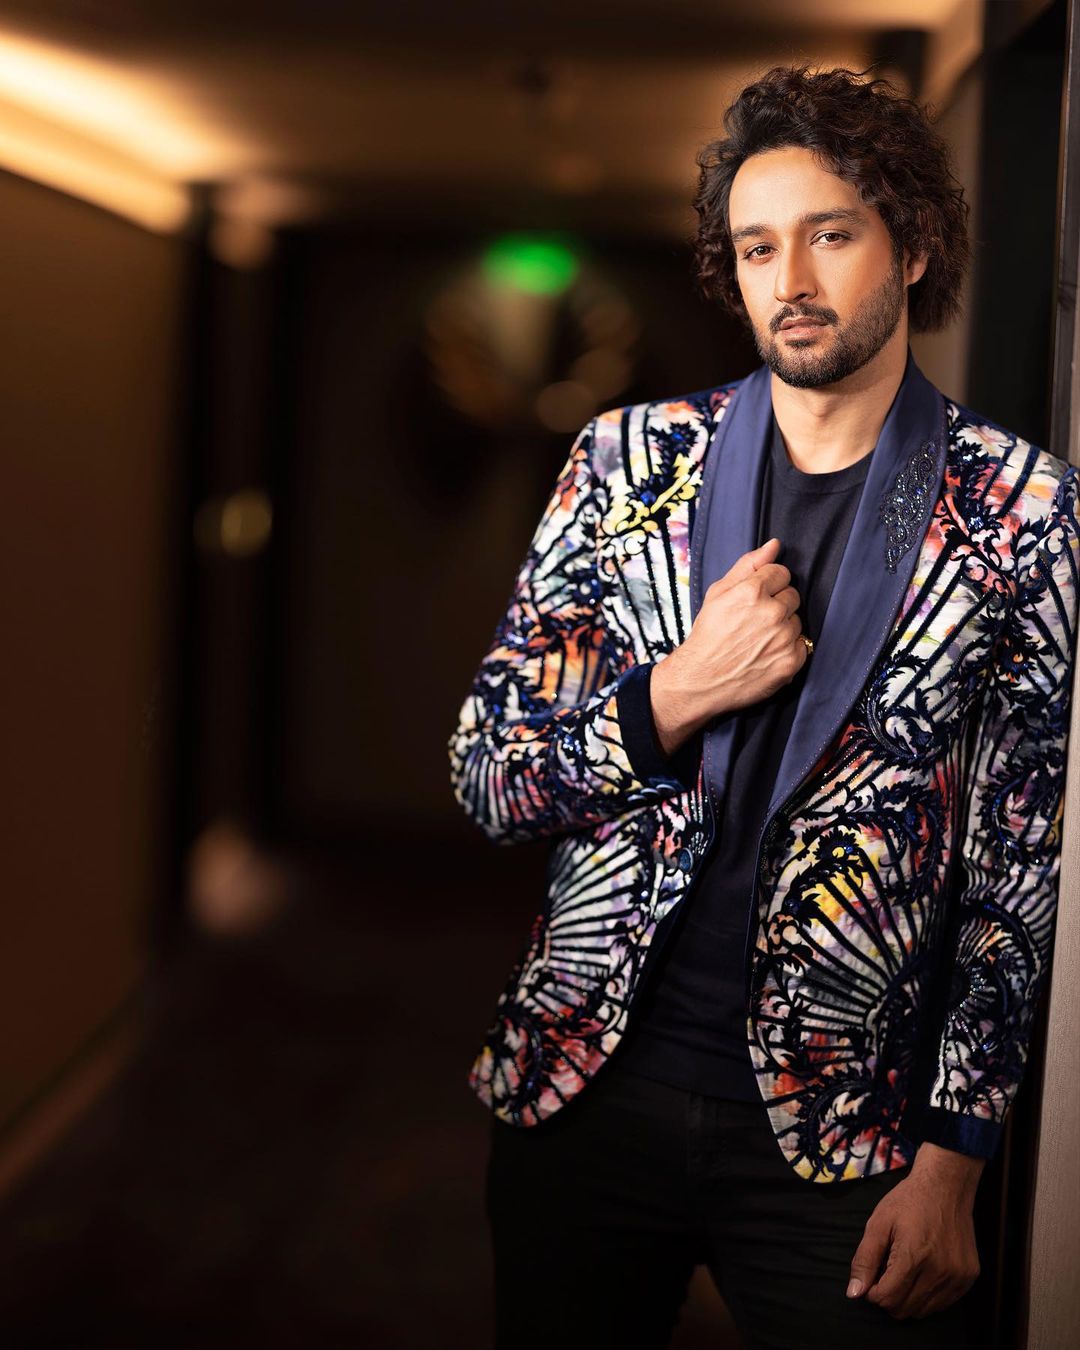 Sourabh Raaj Jain poses for a photo in Mumbai in autumn 2022. He has dark brown, medium-length curly hair swept to one side and a trimmed beard and moustache. He is stood in a low-lit hallway and is wearing a flamboyant, high-contrast tuxedo made from pale fabric with a vibrant, multicoloured floral motif that is embellished with black appliqué and blue beadwork in a baroque tendril design, with a dark blue satin collar that also features beadwork on one side. The jacket is styled with a plain navy blue t-shirt and black jeans. He is looking directly at the camera.